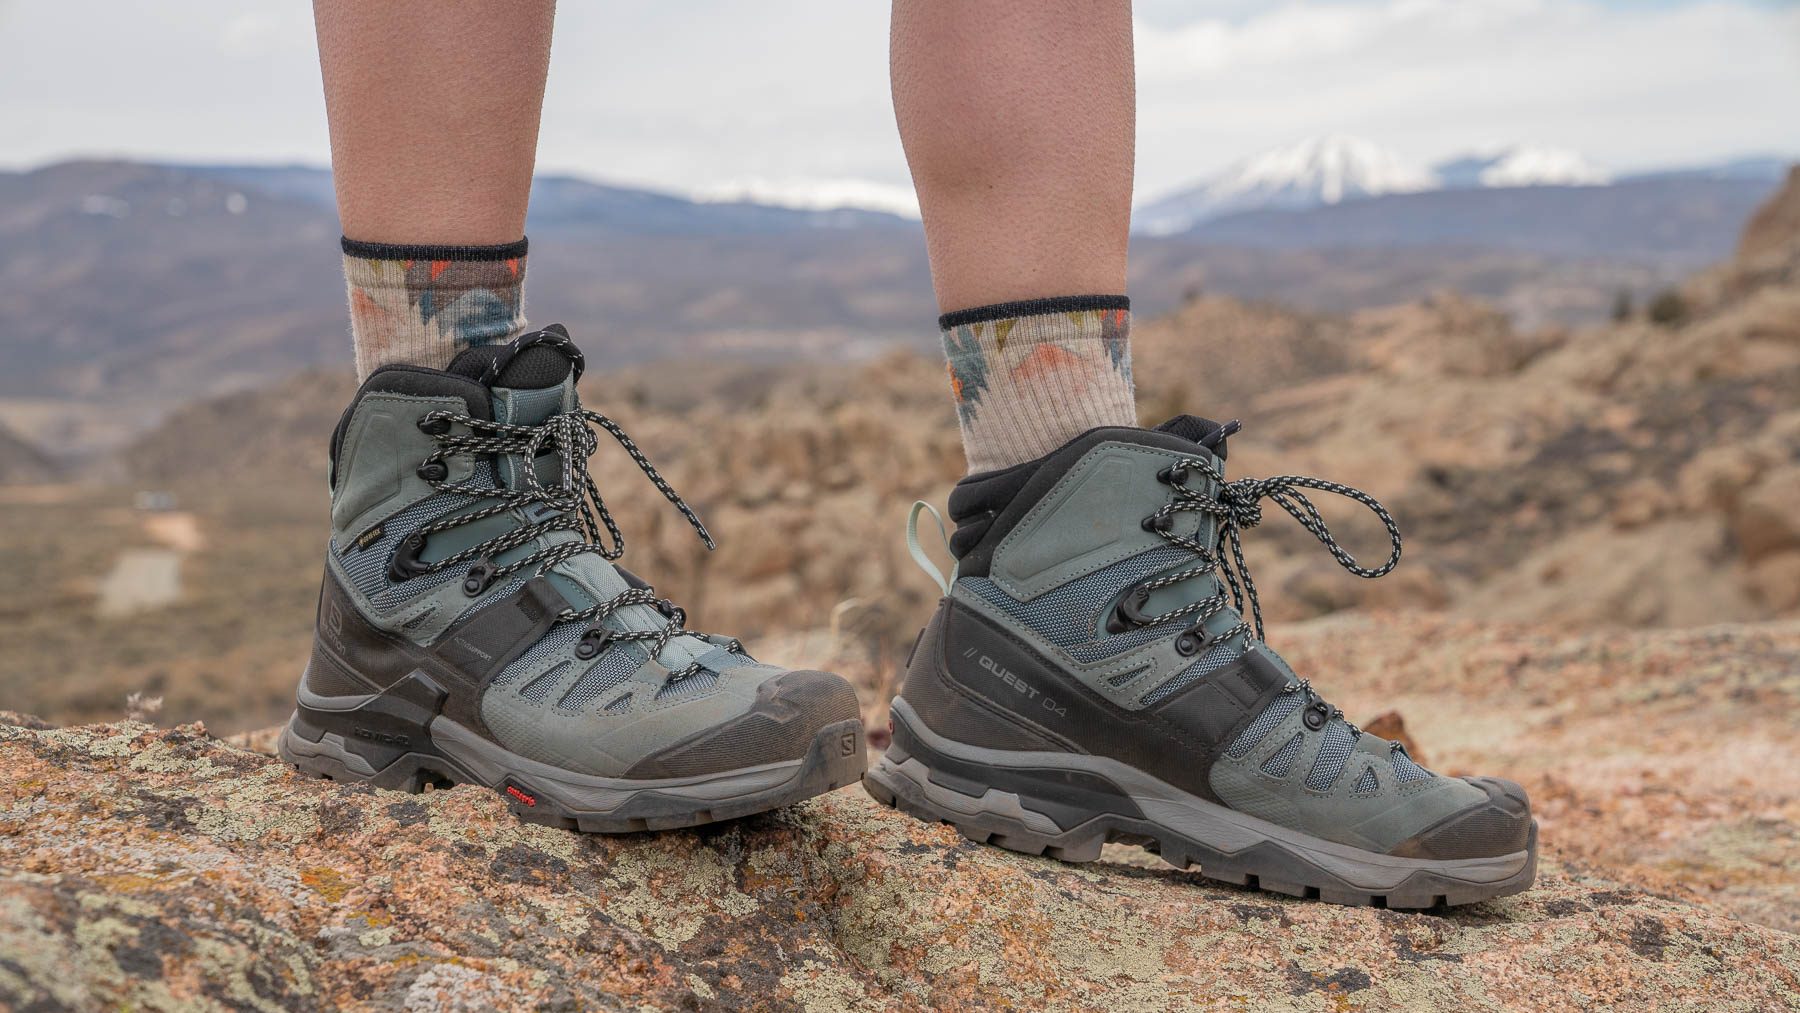 Hiking Boots for Heavy Loads